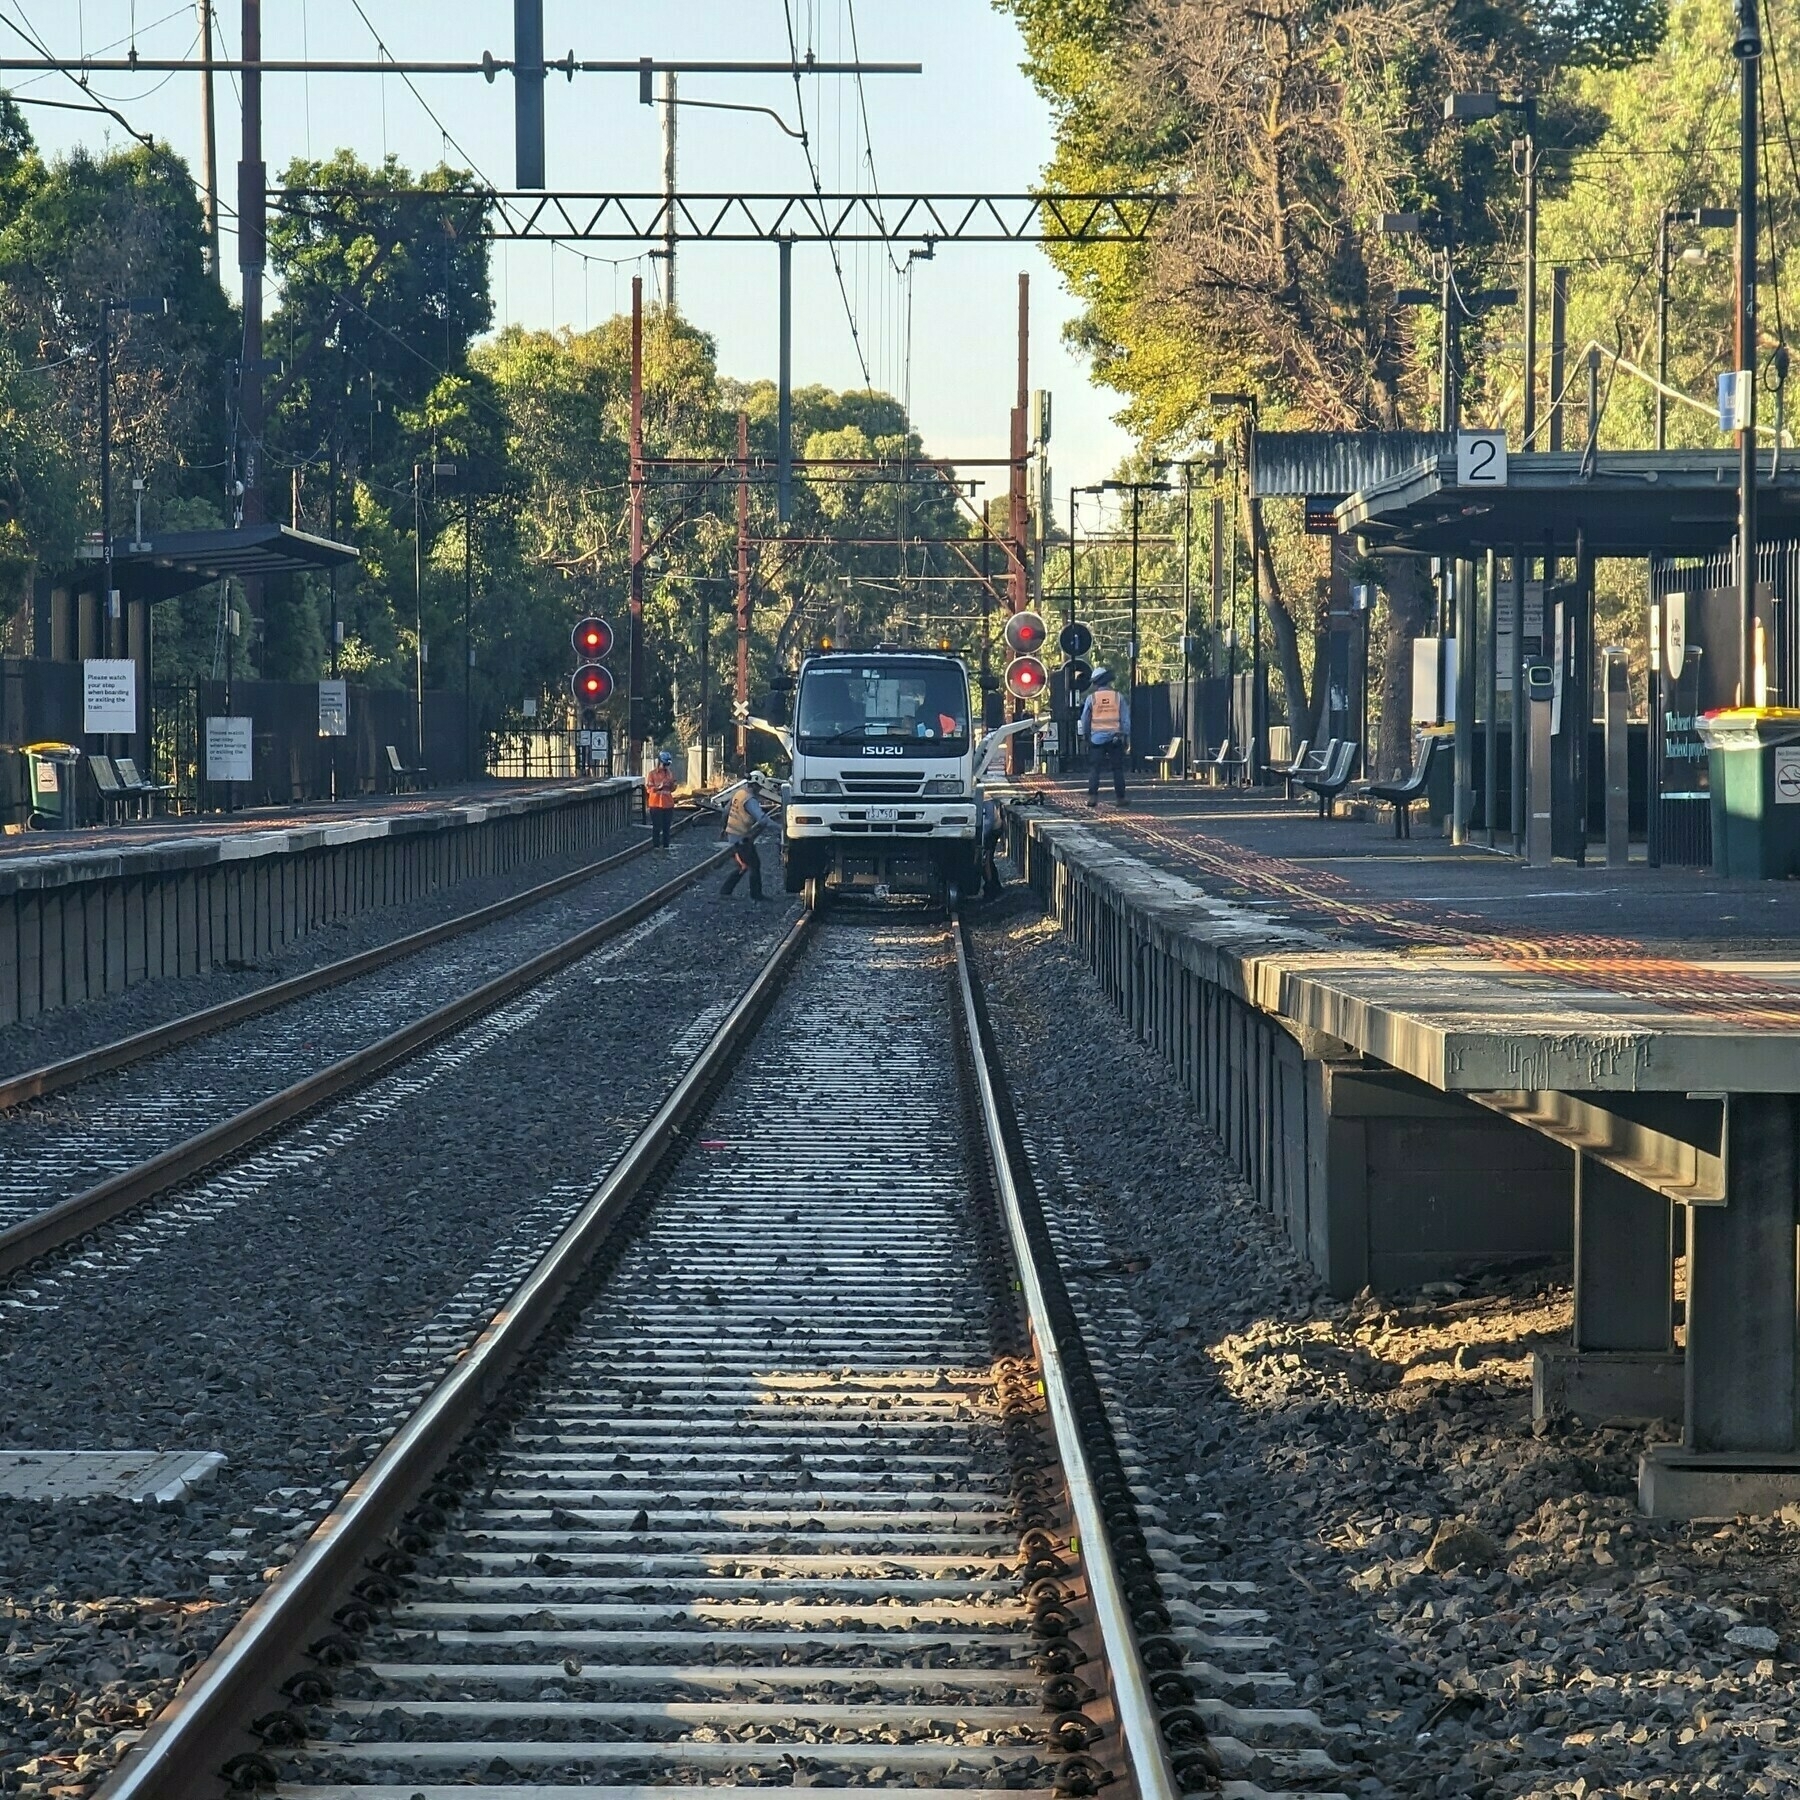 Truck on rail tracks at a station with workers.